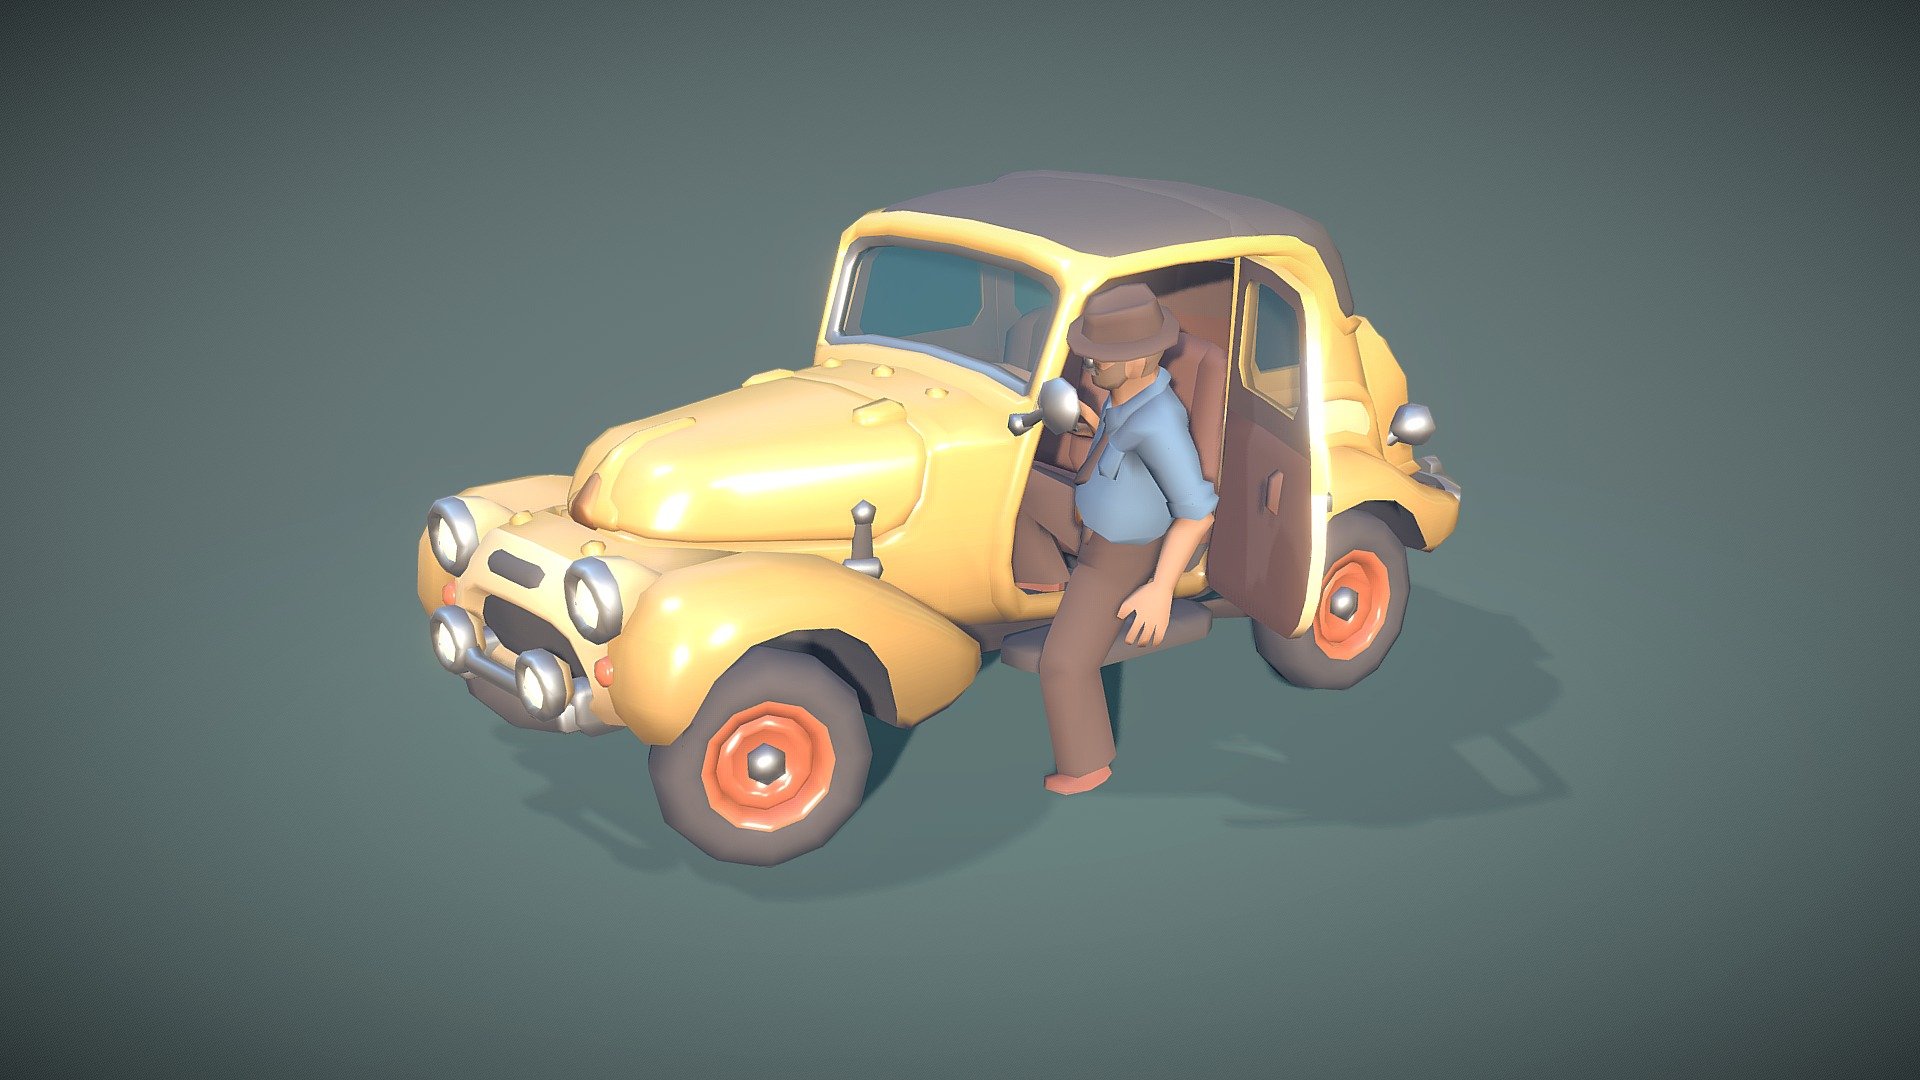 Yay! It's released!)

The main vehicle body here is the same as in this model (https://skfb.ly/ouswY), but the attached parts (bonnet, fenders, etc.) are different 3d model